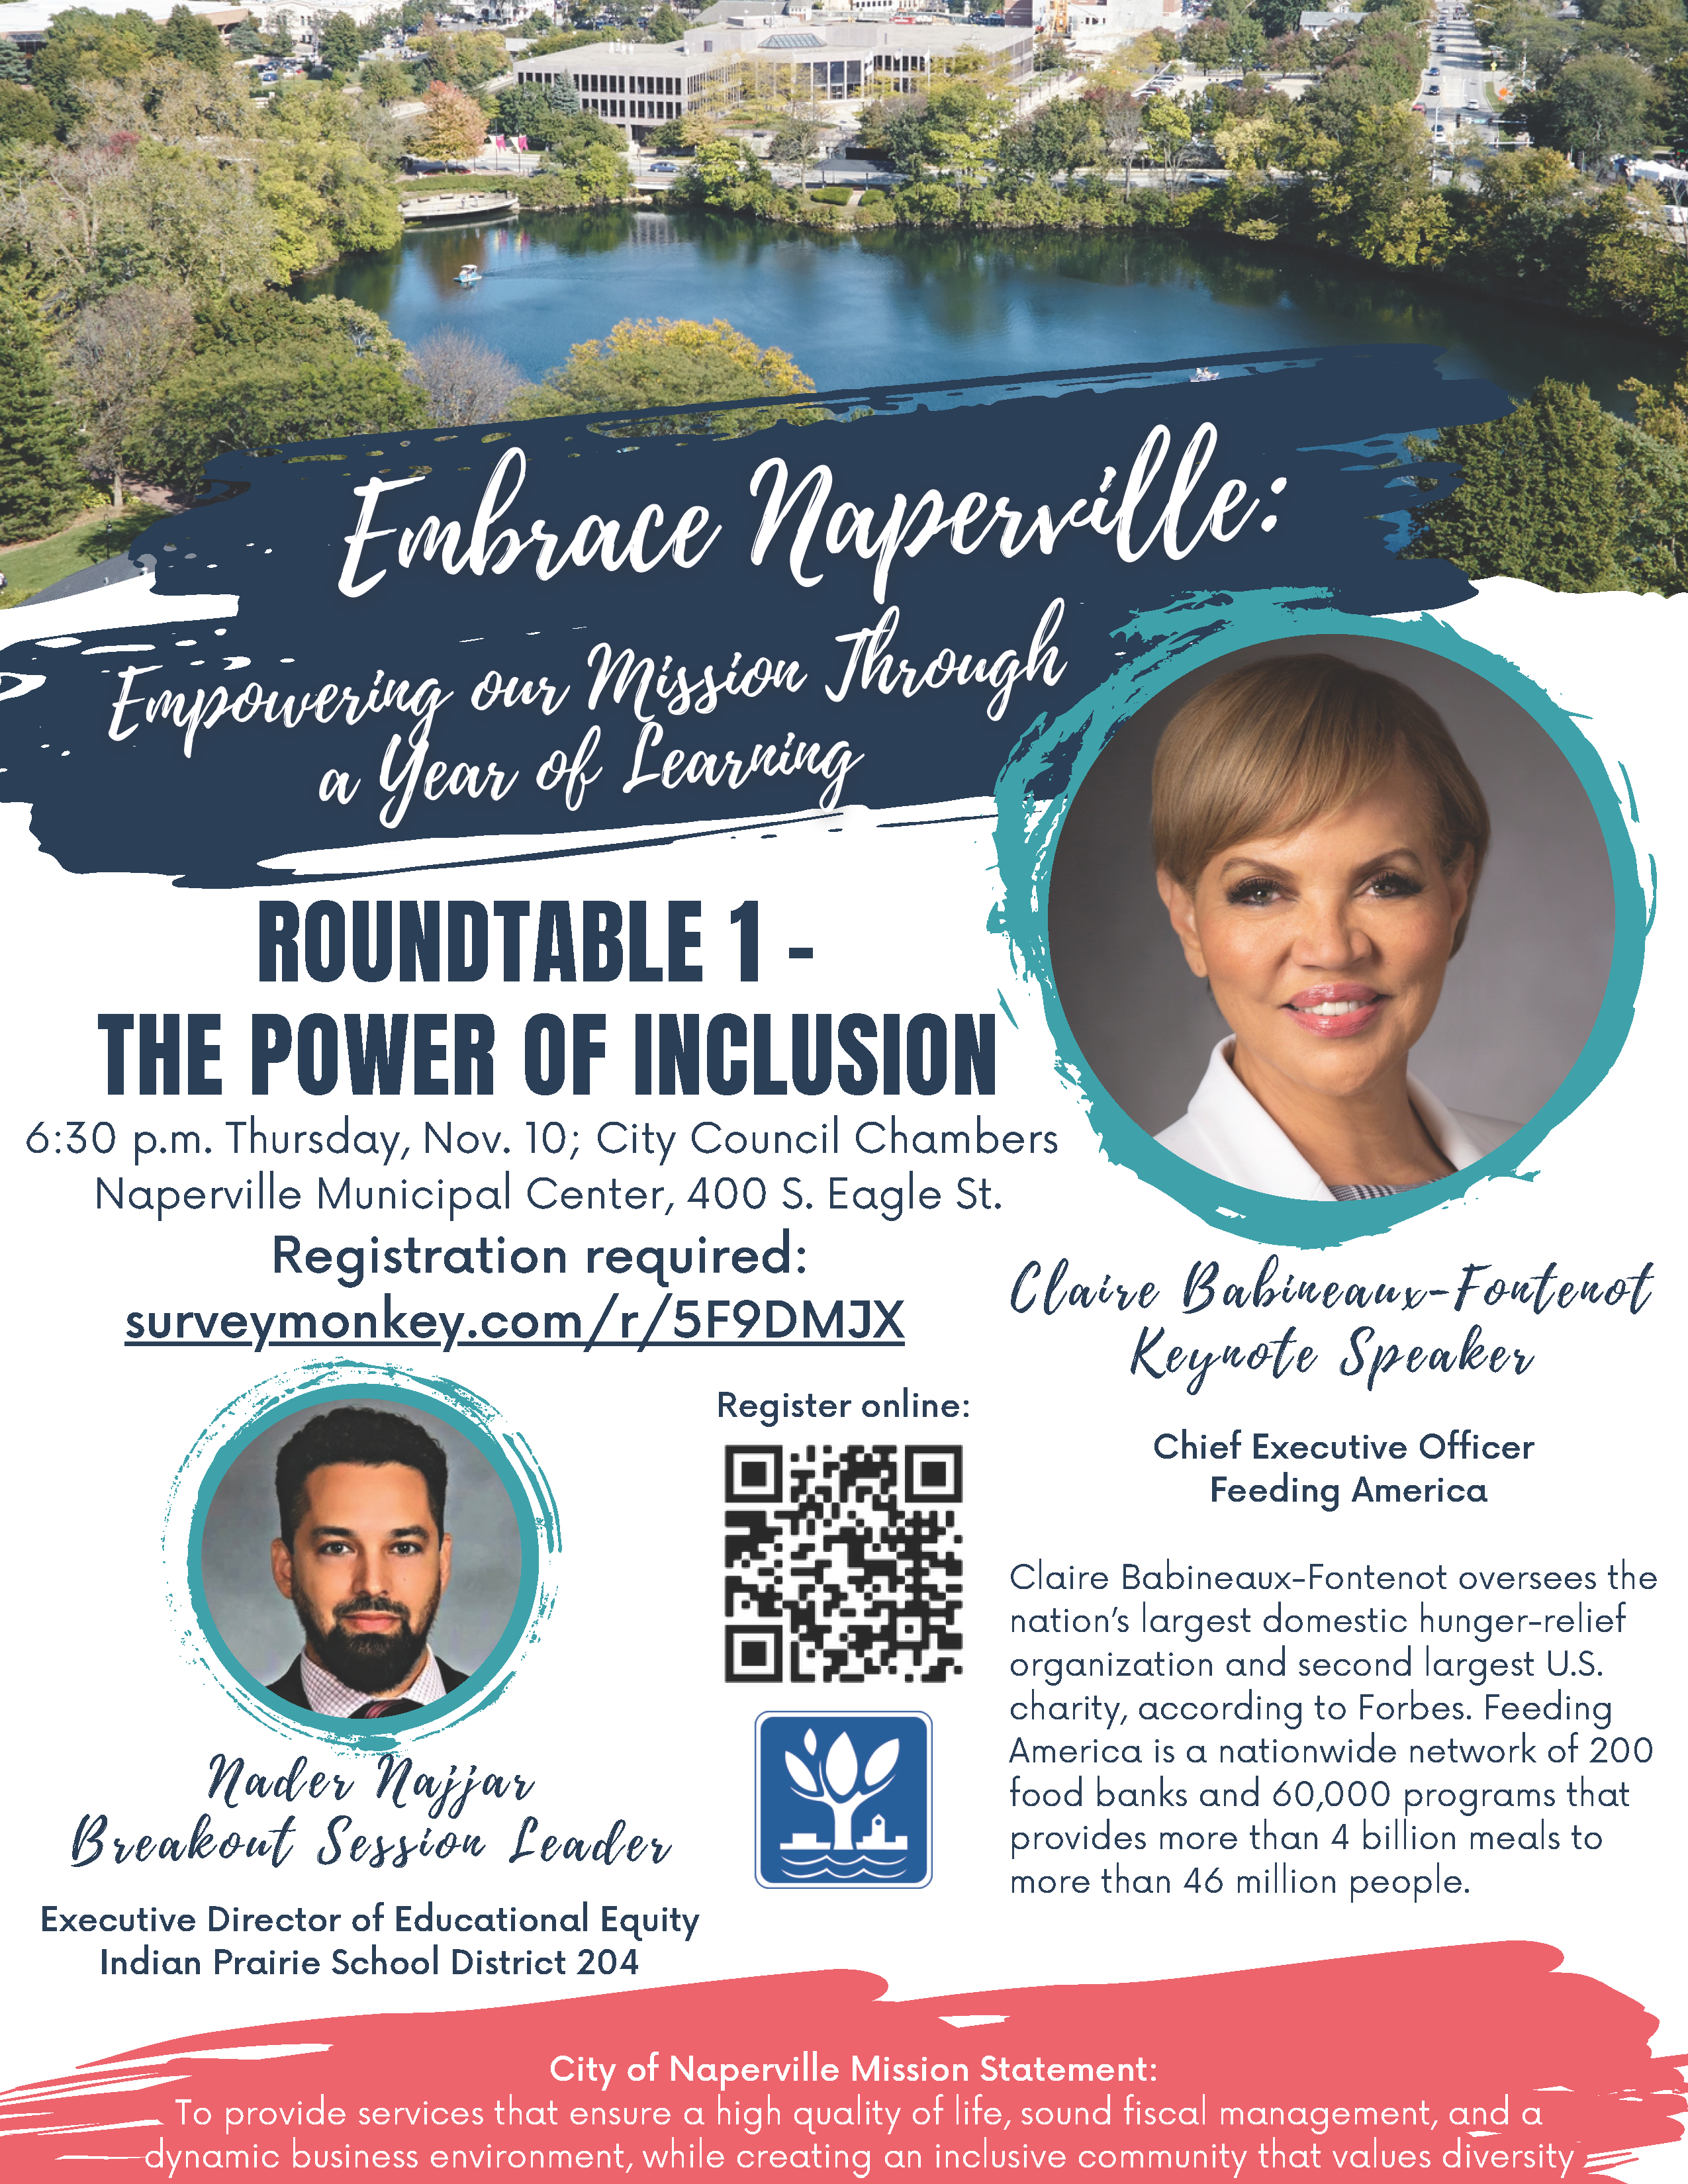 Event flyer for the Power of Inclusion event on Nov. 10